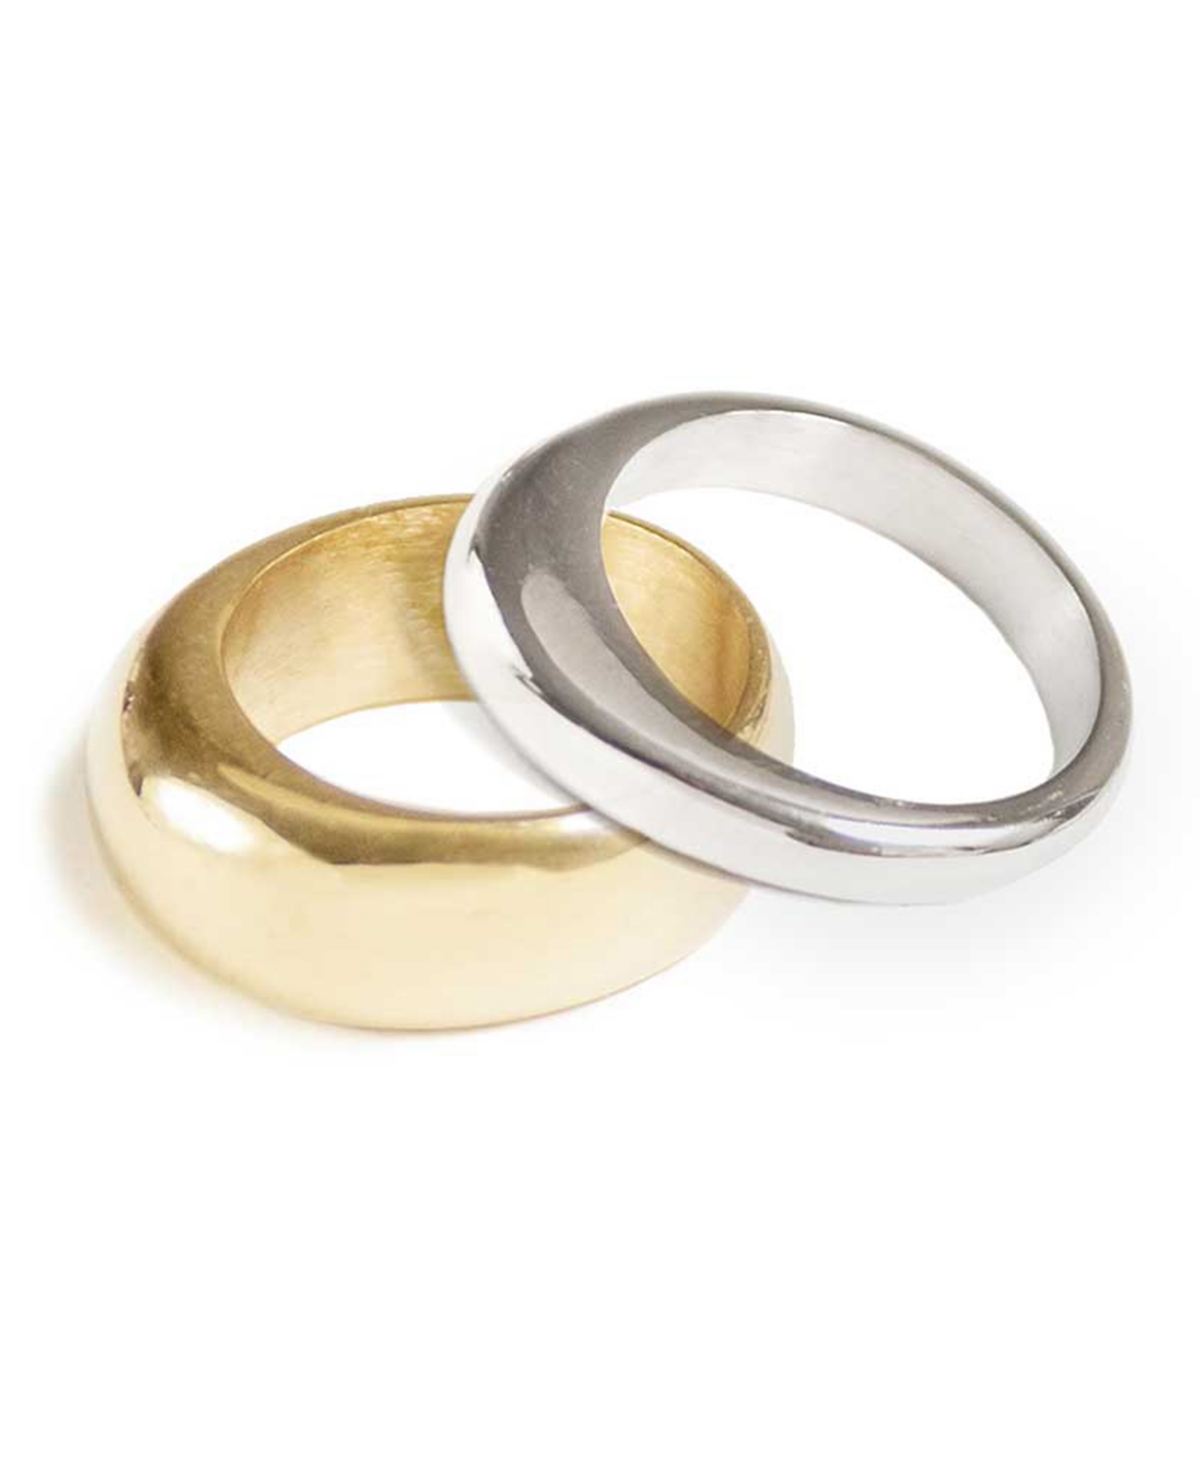 Soko 24k Gold-plated Organic Mixed Metal Stacking Rings 2 Piece Set In Gold  Silver